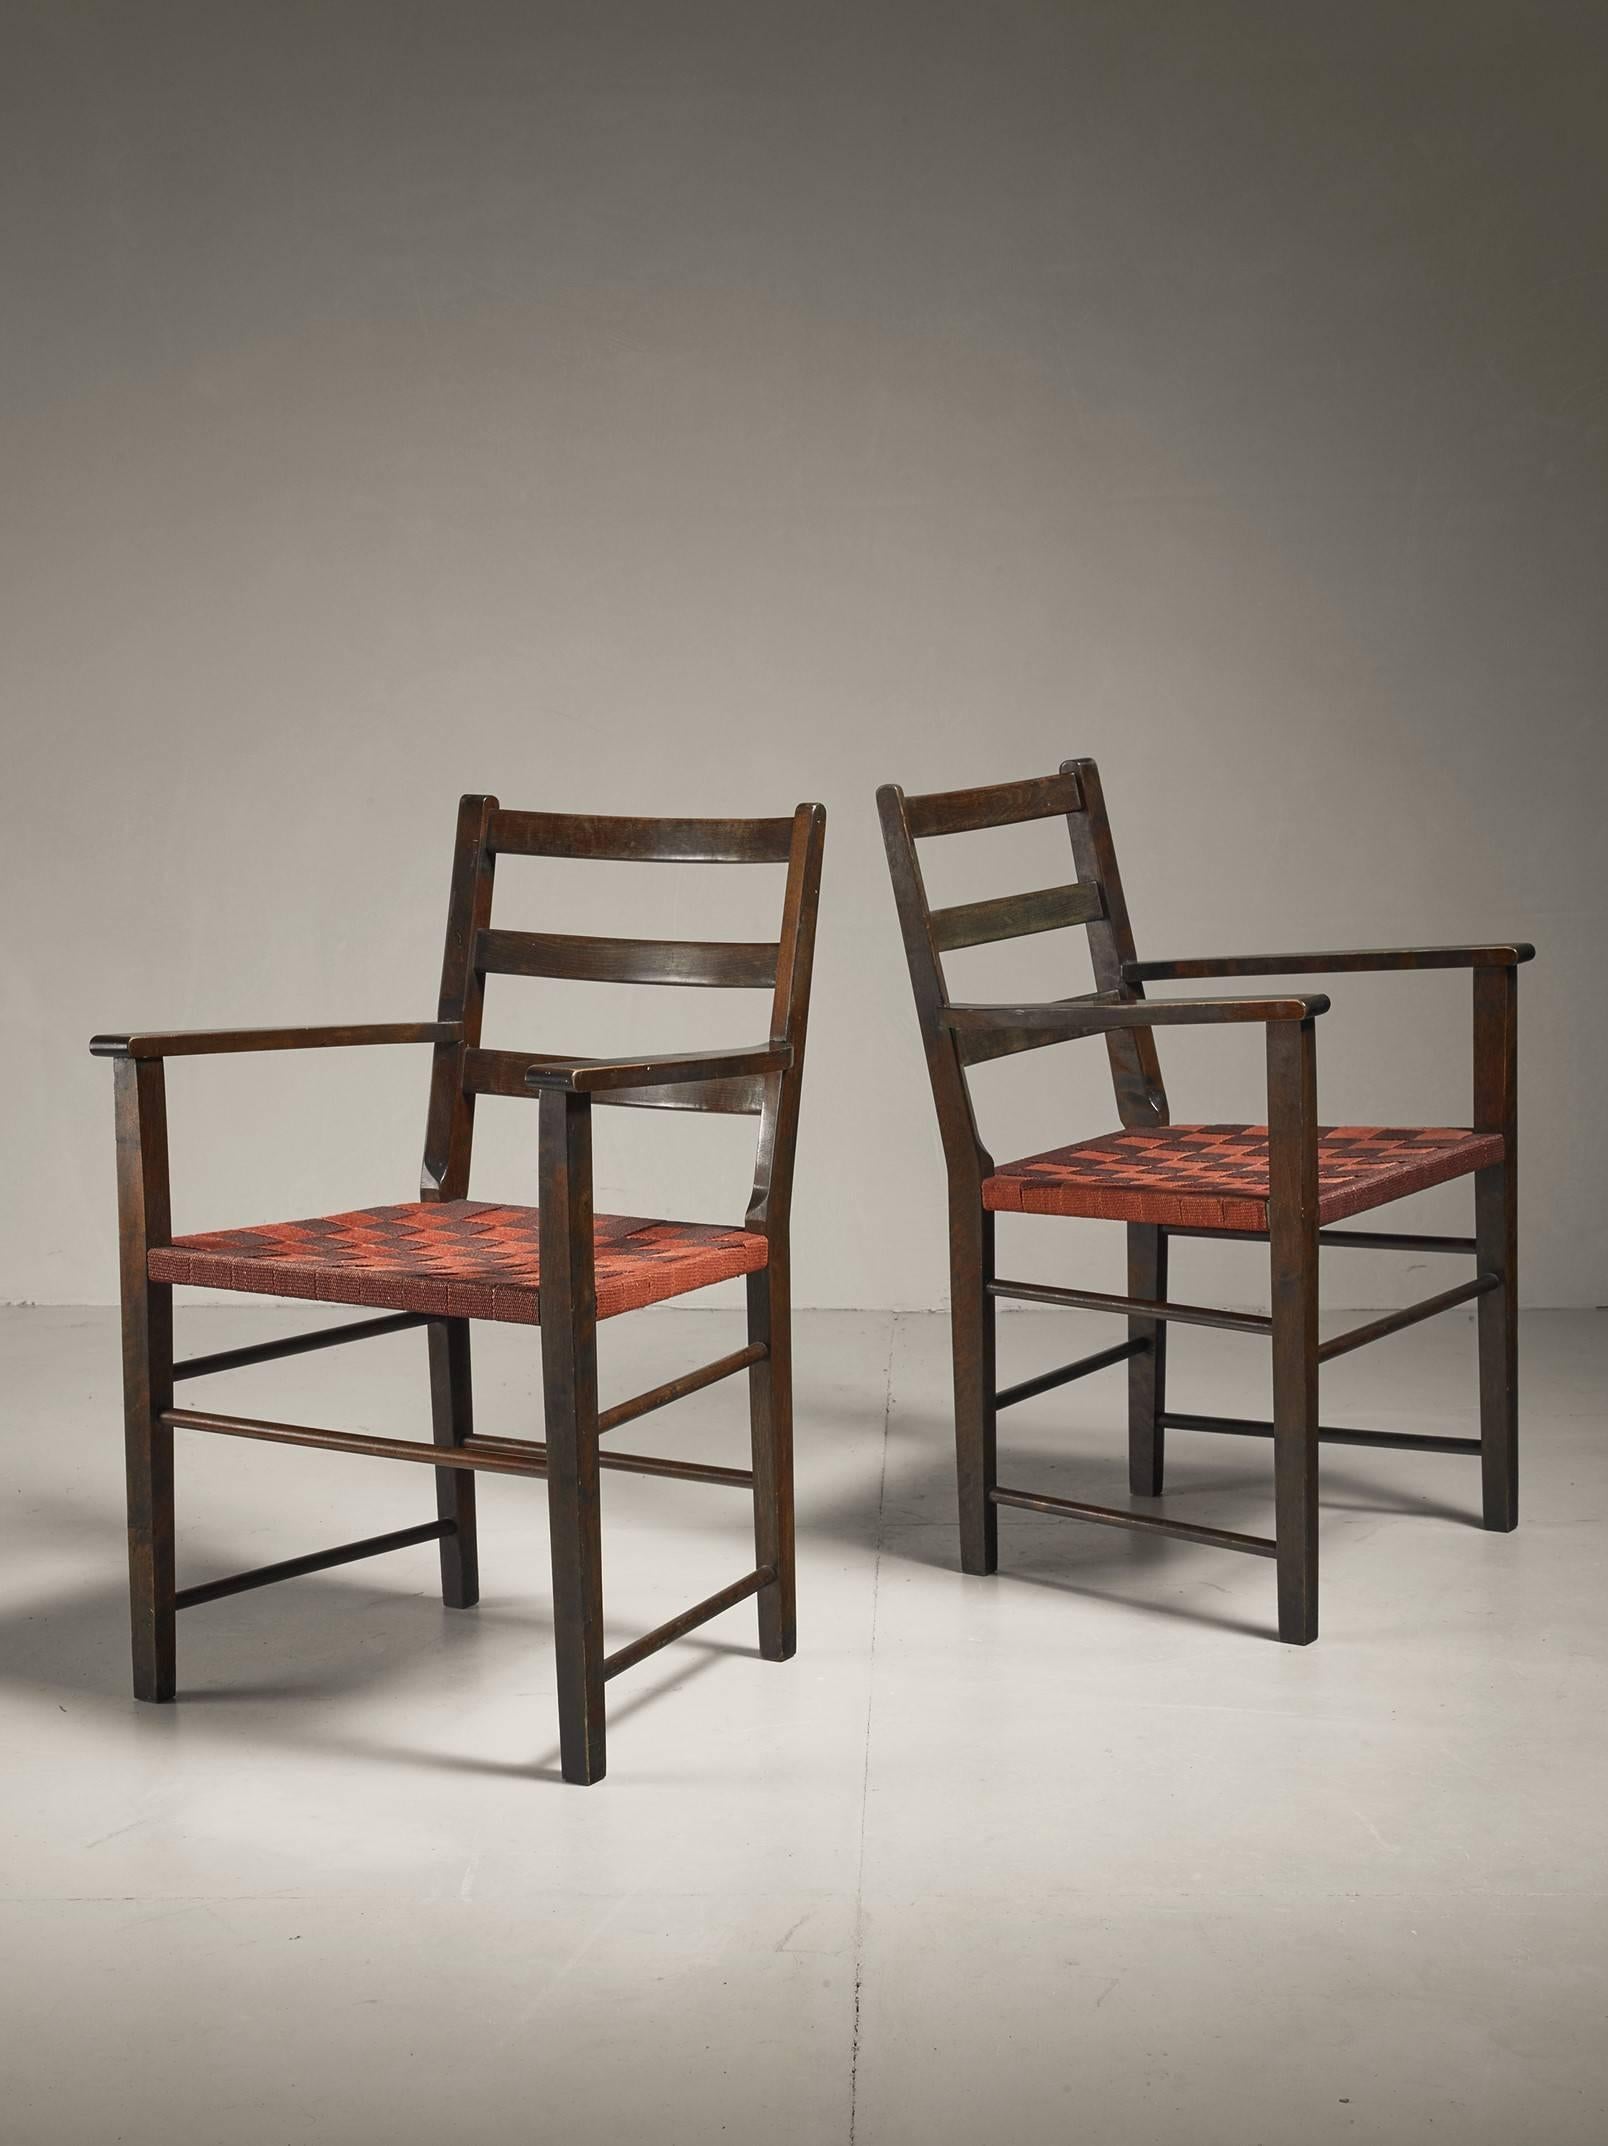 A pair of armchairs by Gemla and attributed to Axel Larsson. The chairs are made of a stained birch frame with a brown and red webbed canvas seating.
Labeled by Gemla and in a good condition.